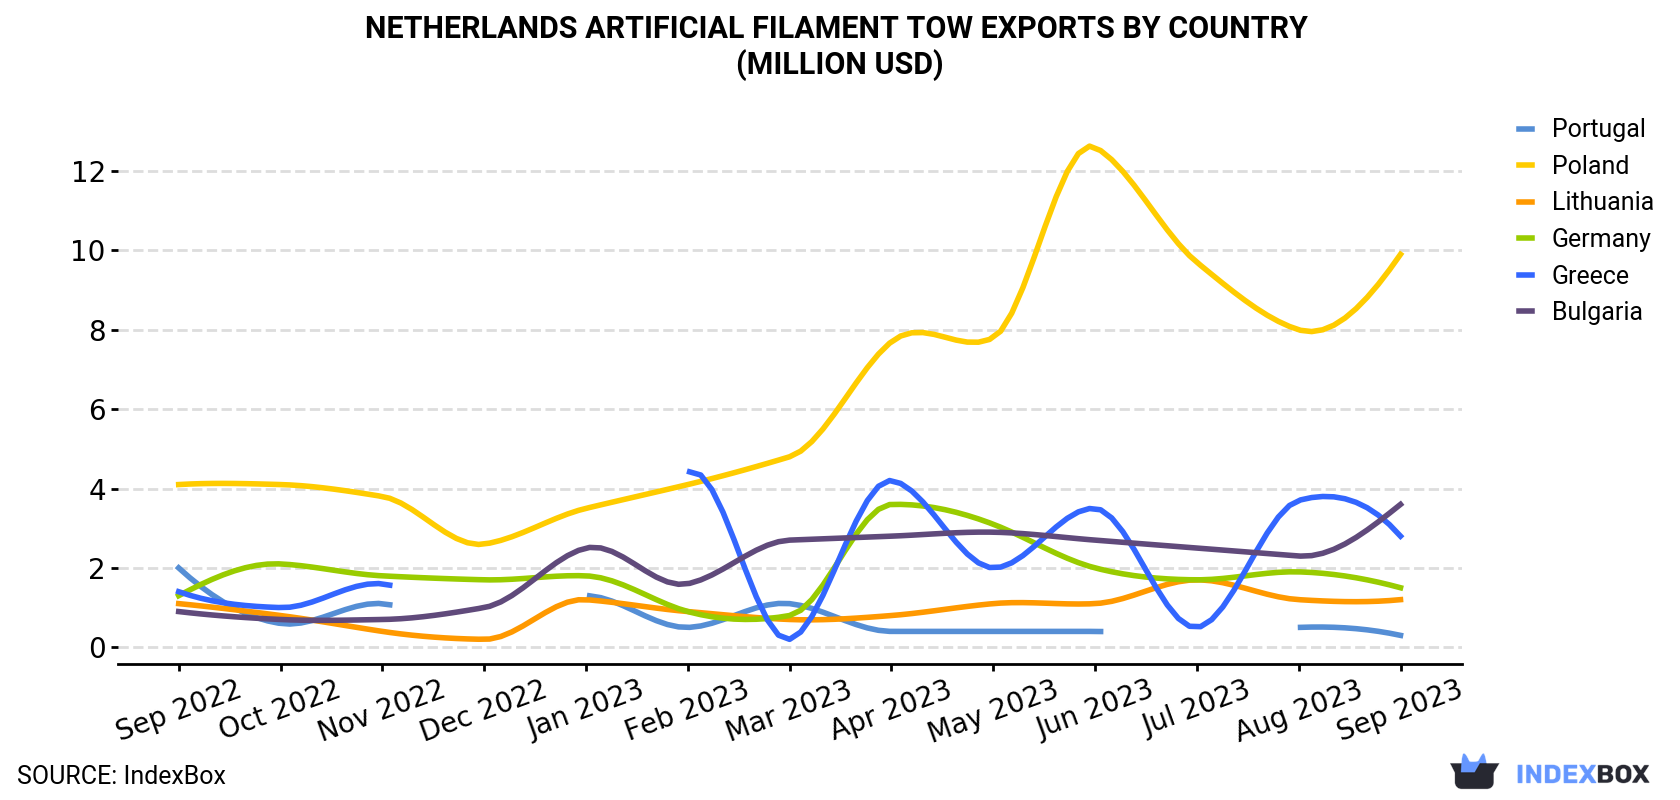 Netherlands Artificial Filament Tow Exports By Country (Million USD)